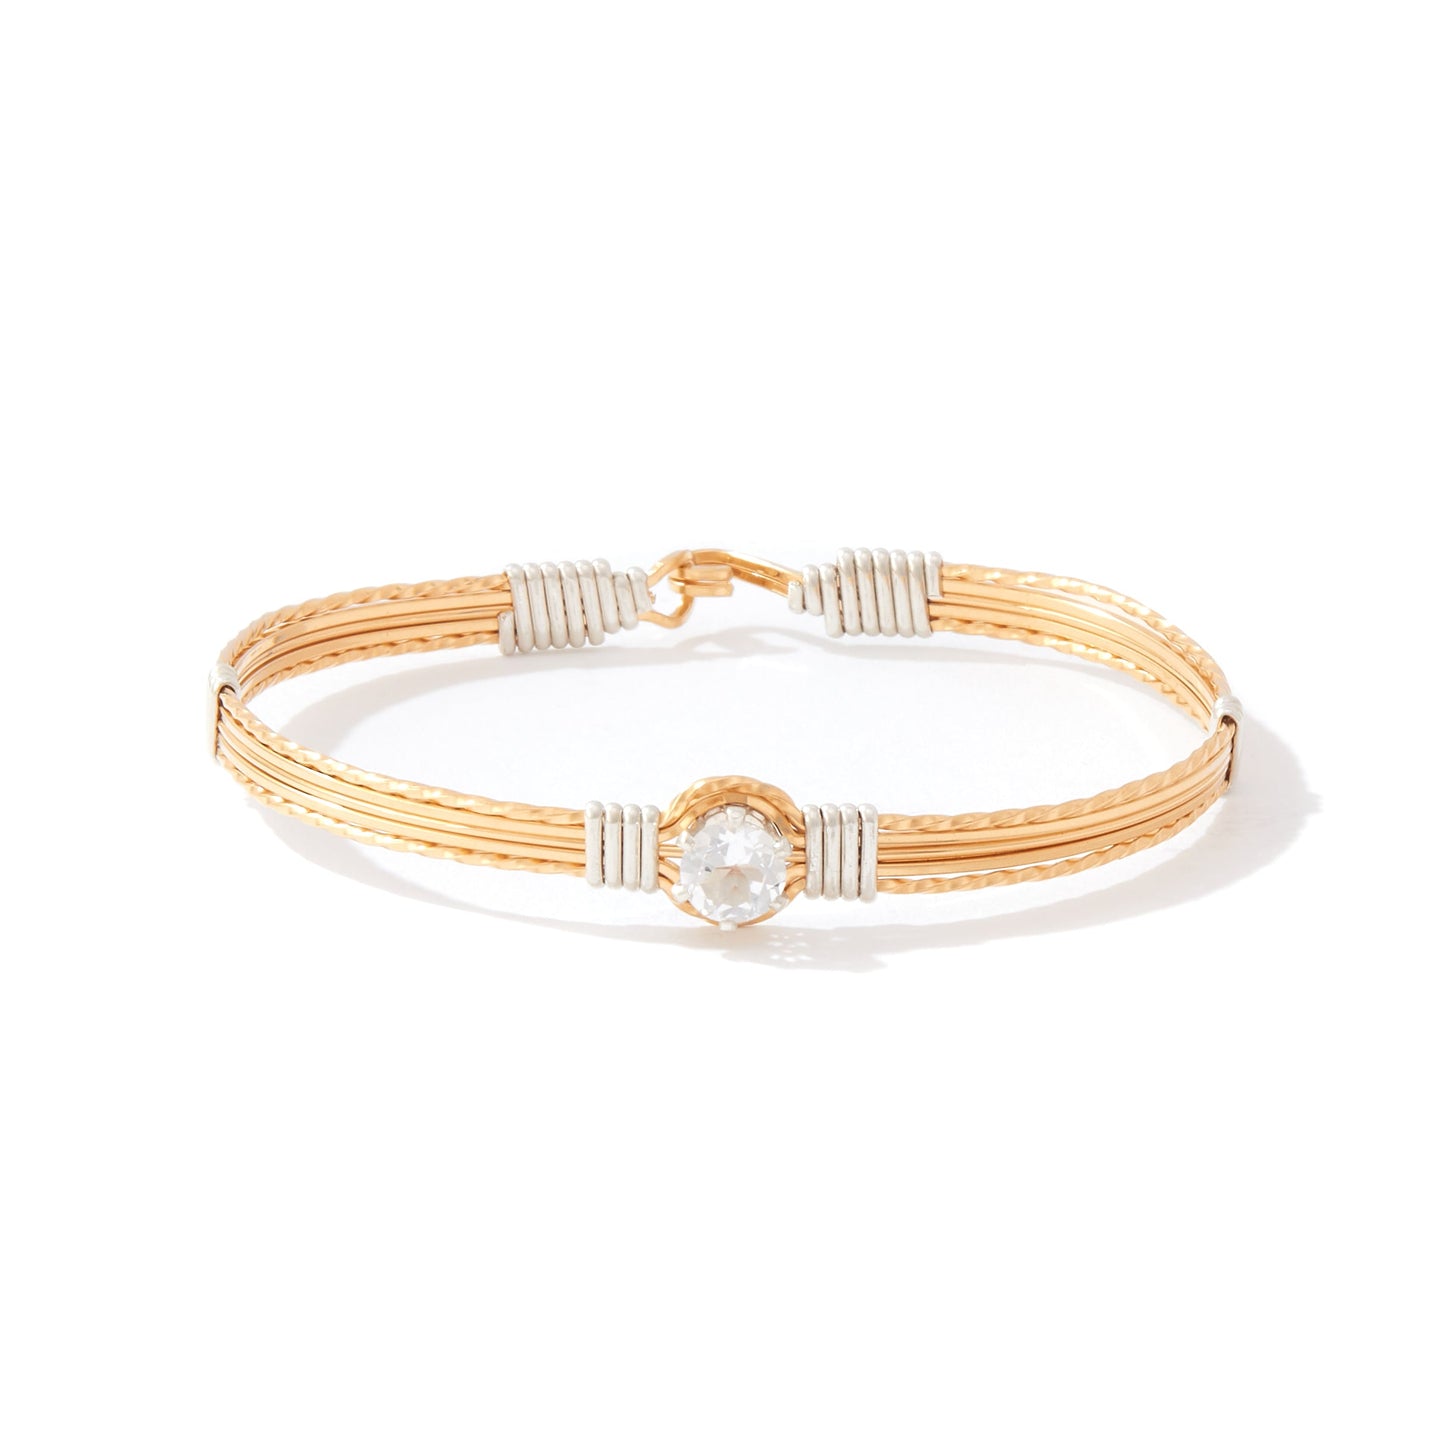 Shining Star Bracelet in 14K Gold Artist Wire with Silver Wraps